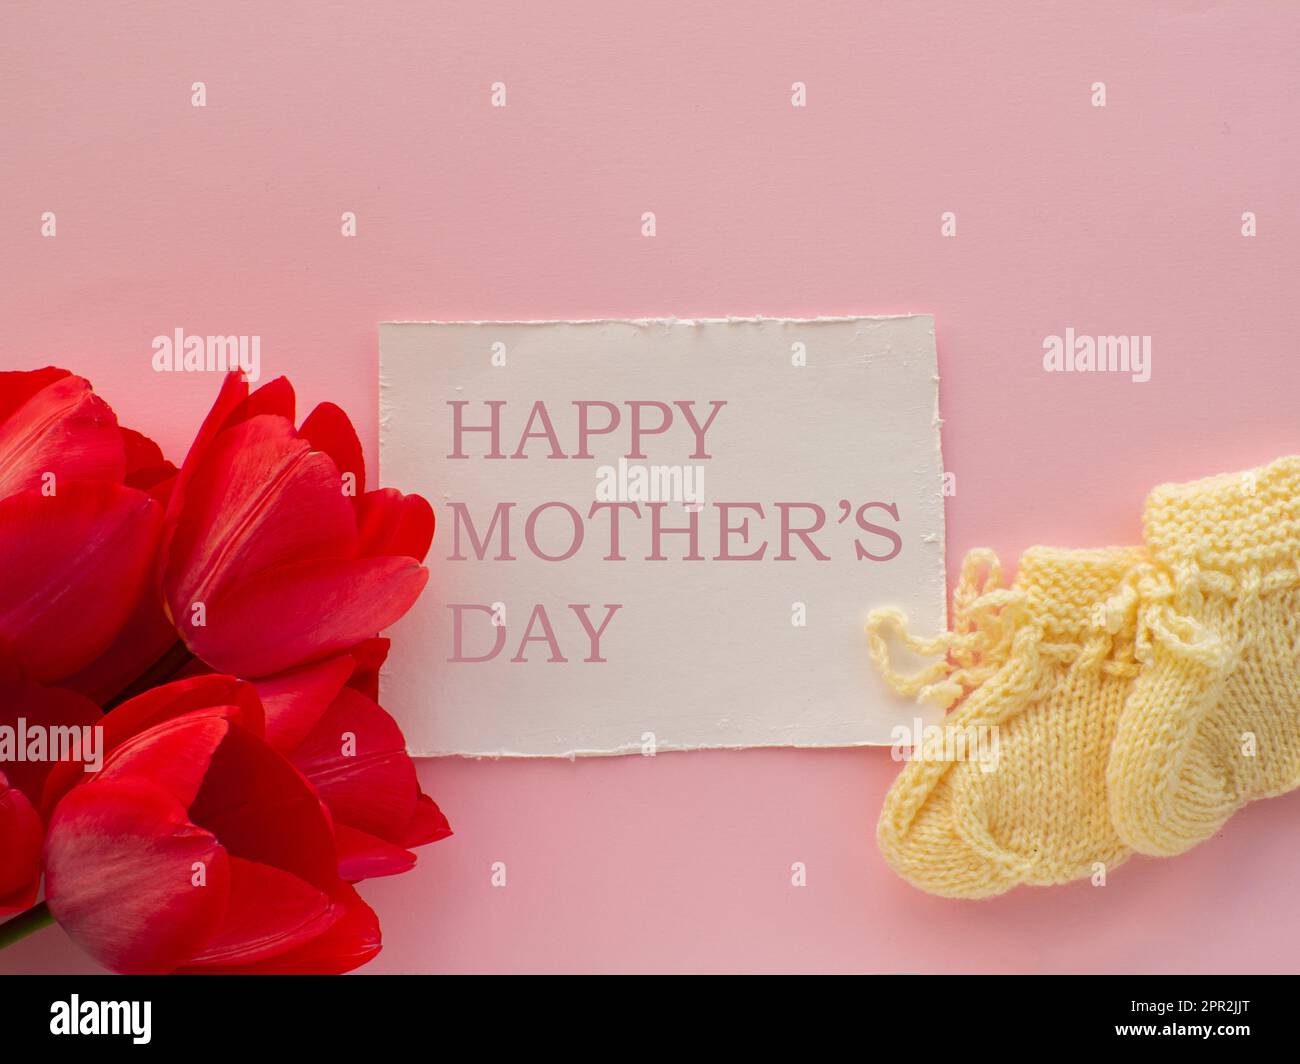 https://c8.alamy.com/comp/2PR2JJT/red-tulips-flowers-and-yellow-booties-for-a-newborn-on-pink-background-with-happy-mothers-day-mothers-day-greeting-card-writing-wishes-for-mother-k-2PR2JJT.jpg